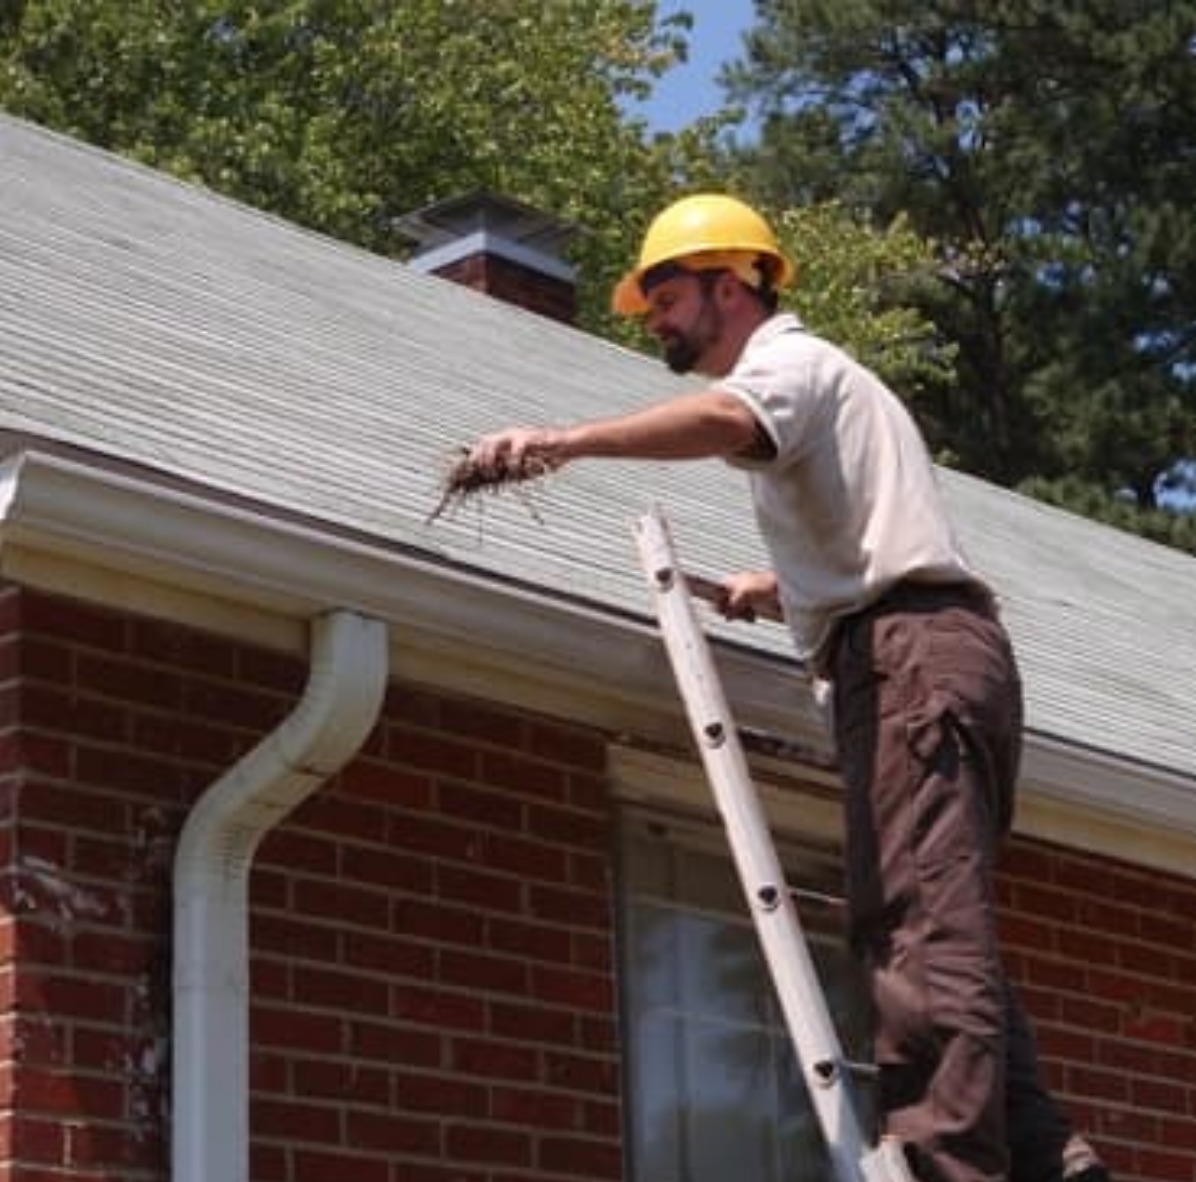 Valhalla NY Gutter Cleaning Company